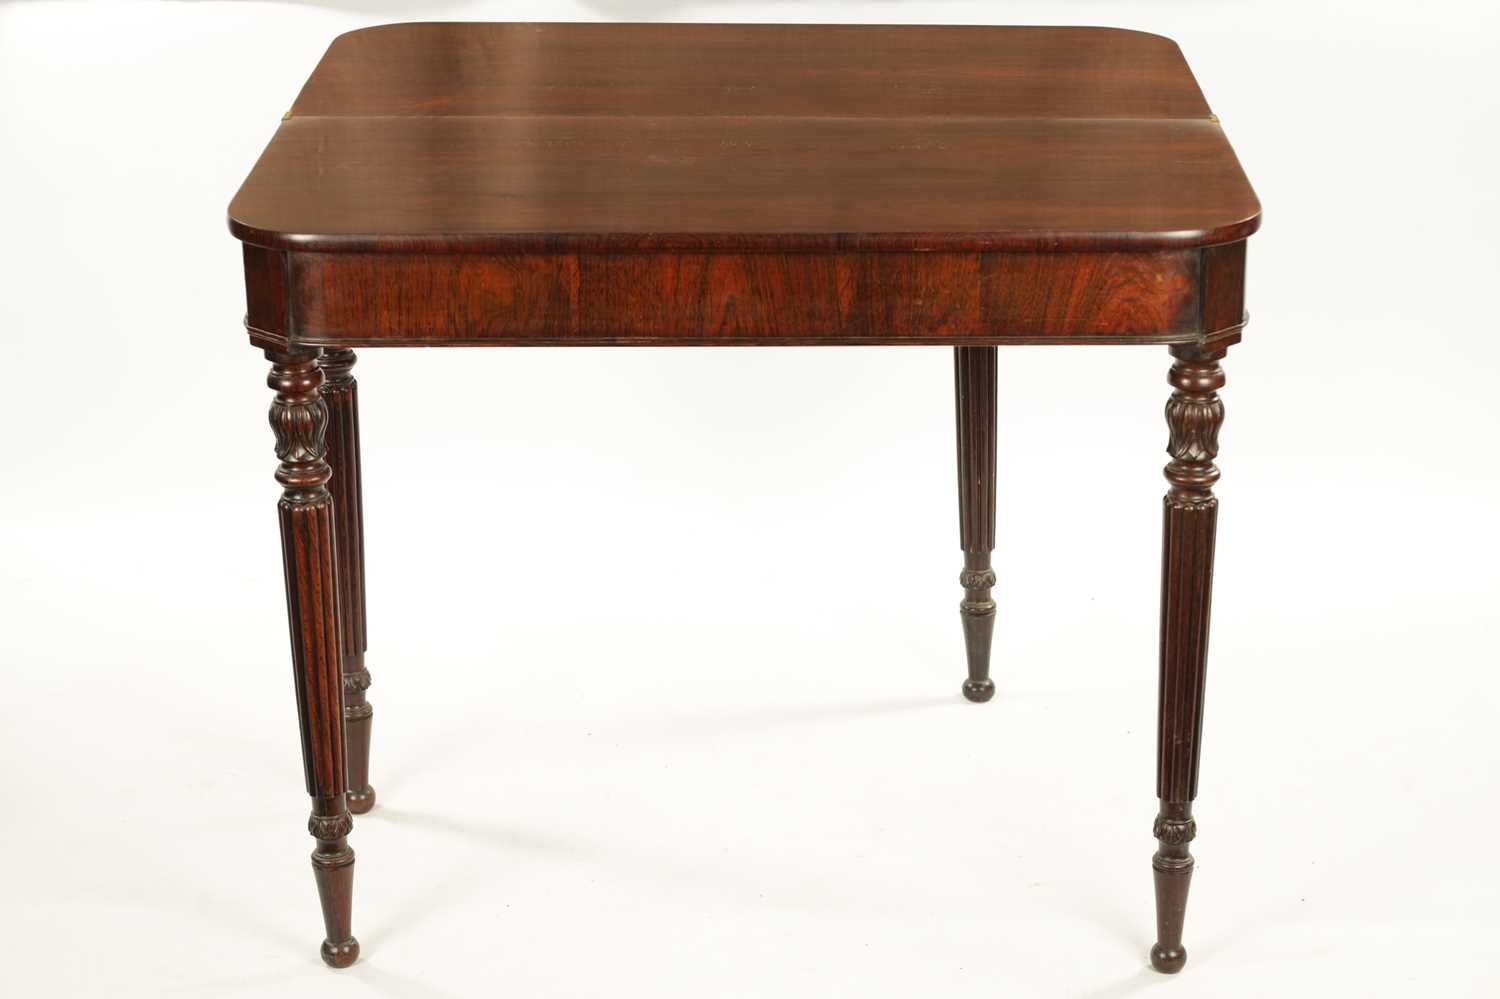 A REGENCY ROSEWOOD TEA TABLE IN THE MANNER OF GILLOWS - Image 7 of 8